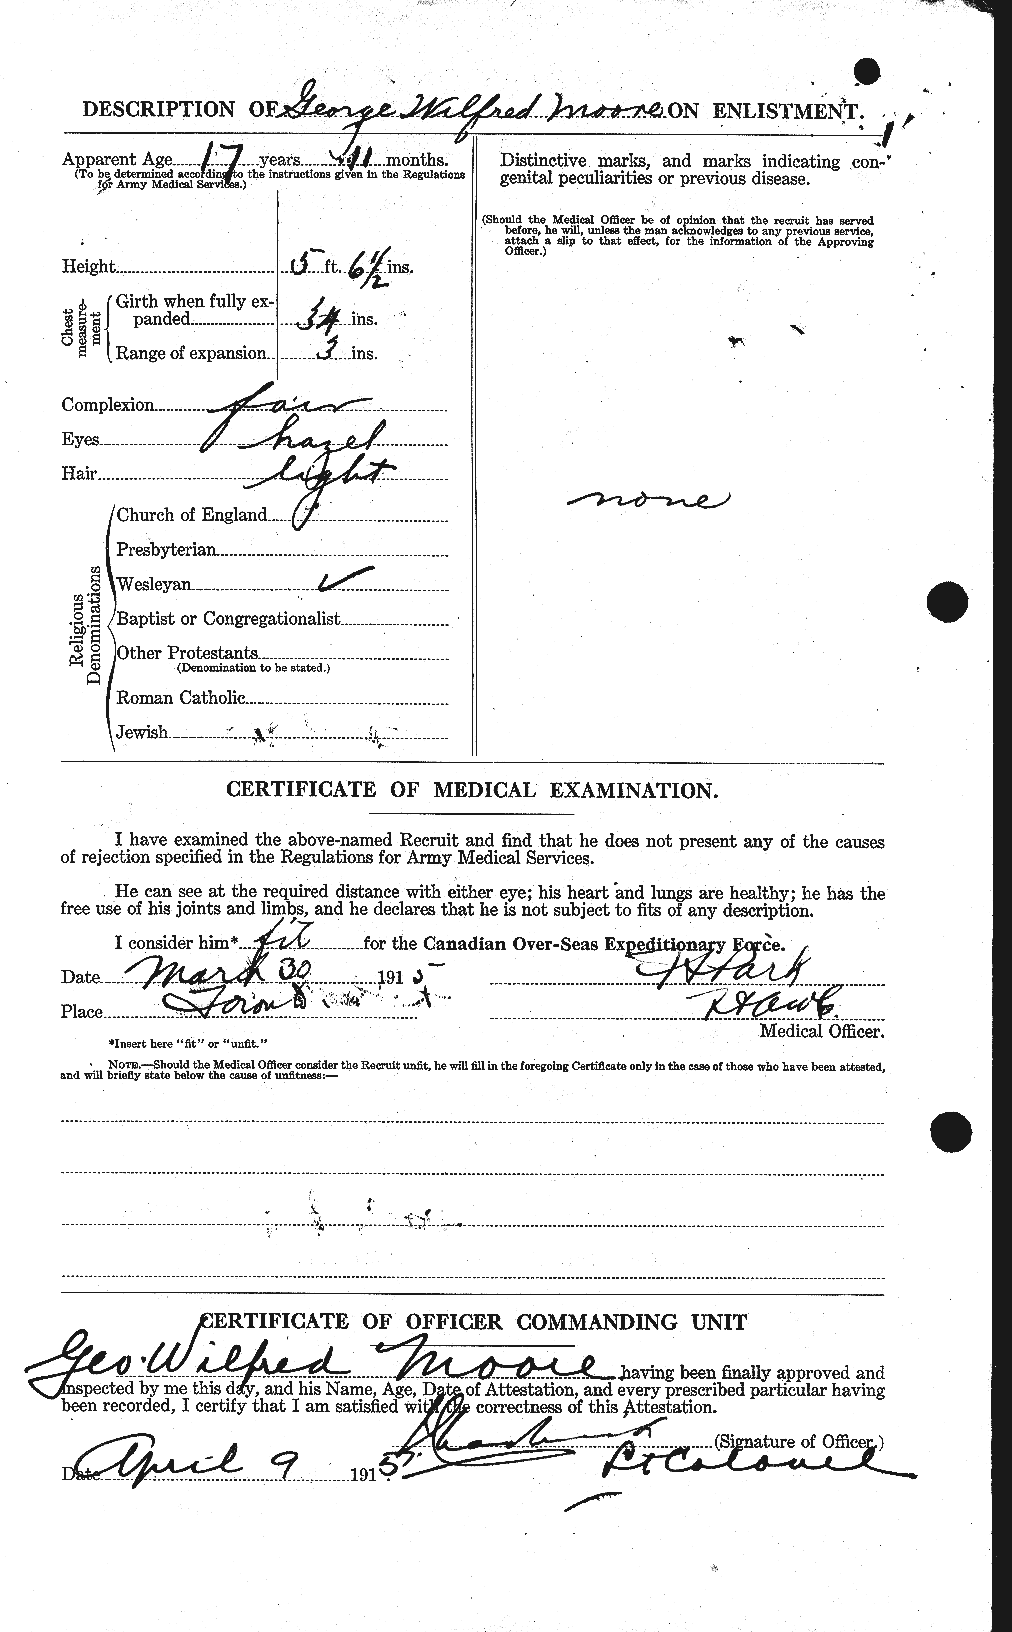 Personnel Records of the First World War - CEF 502028b